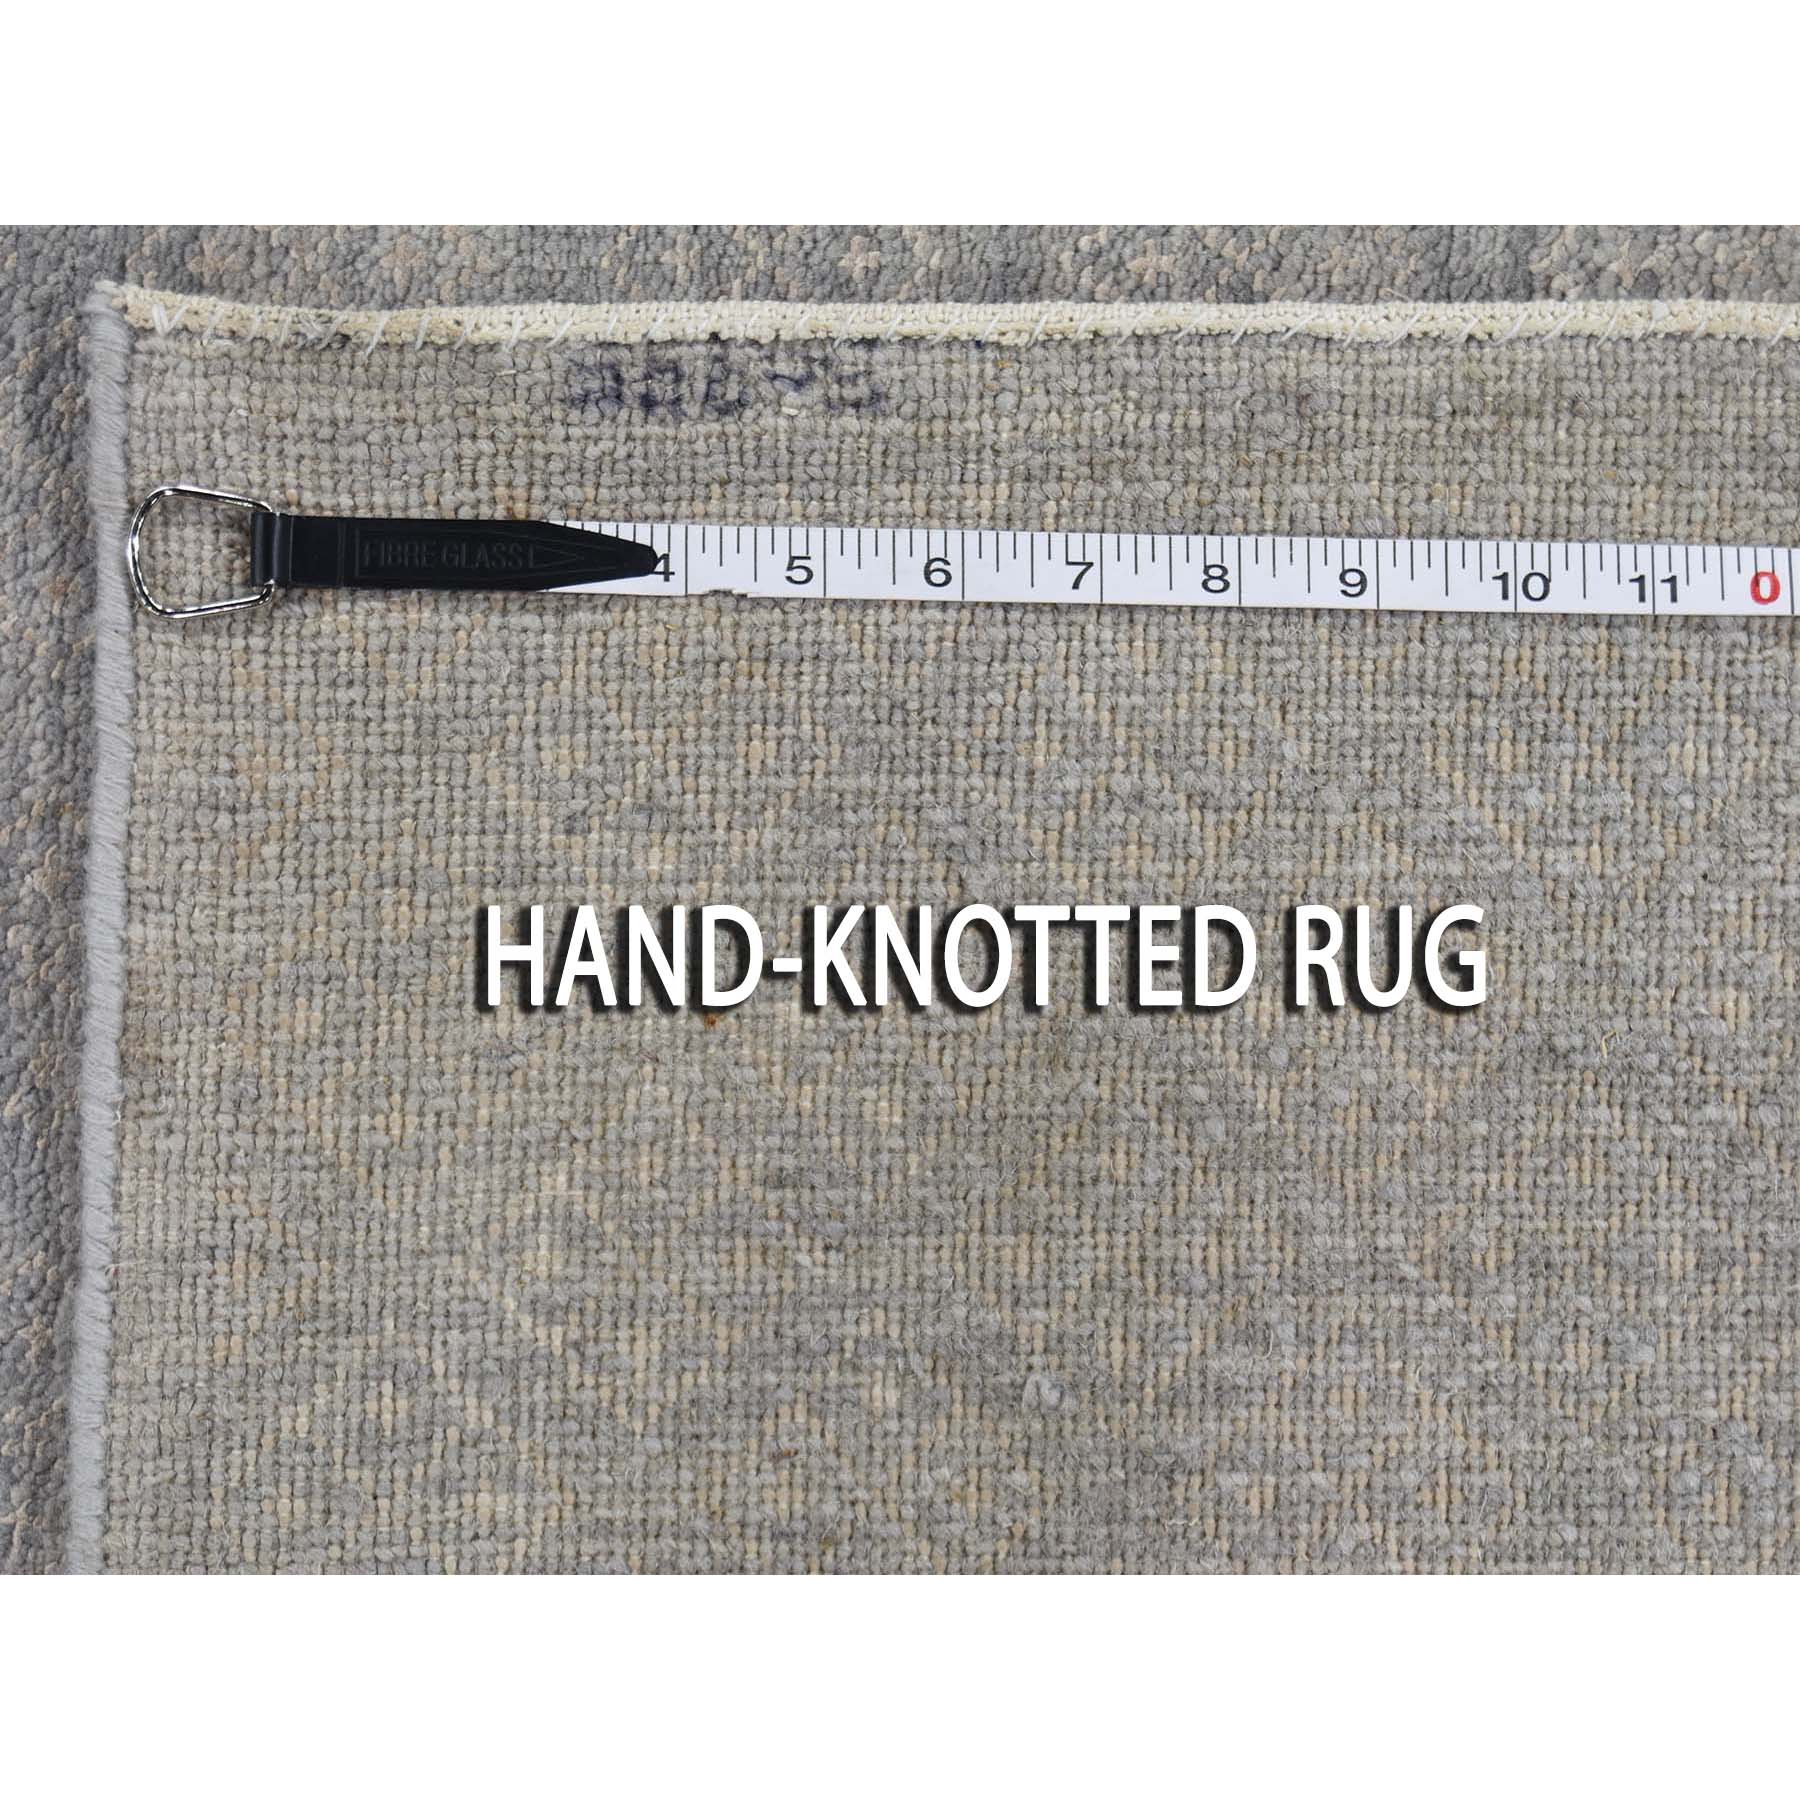 8-10 x11-10  Gray Modern Tone on Tone Wool and Silk Hand Knotted Oriental Rug 